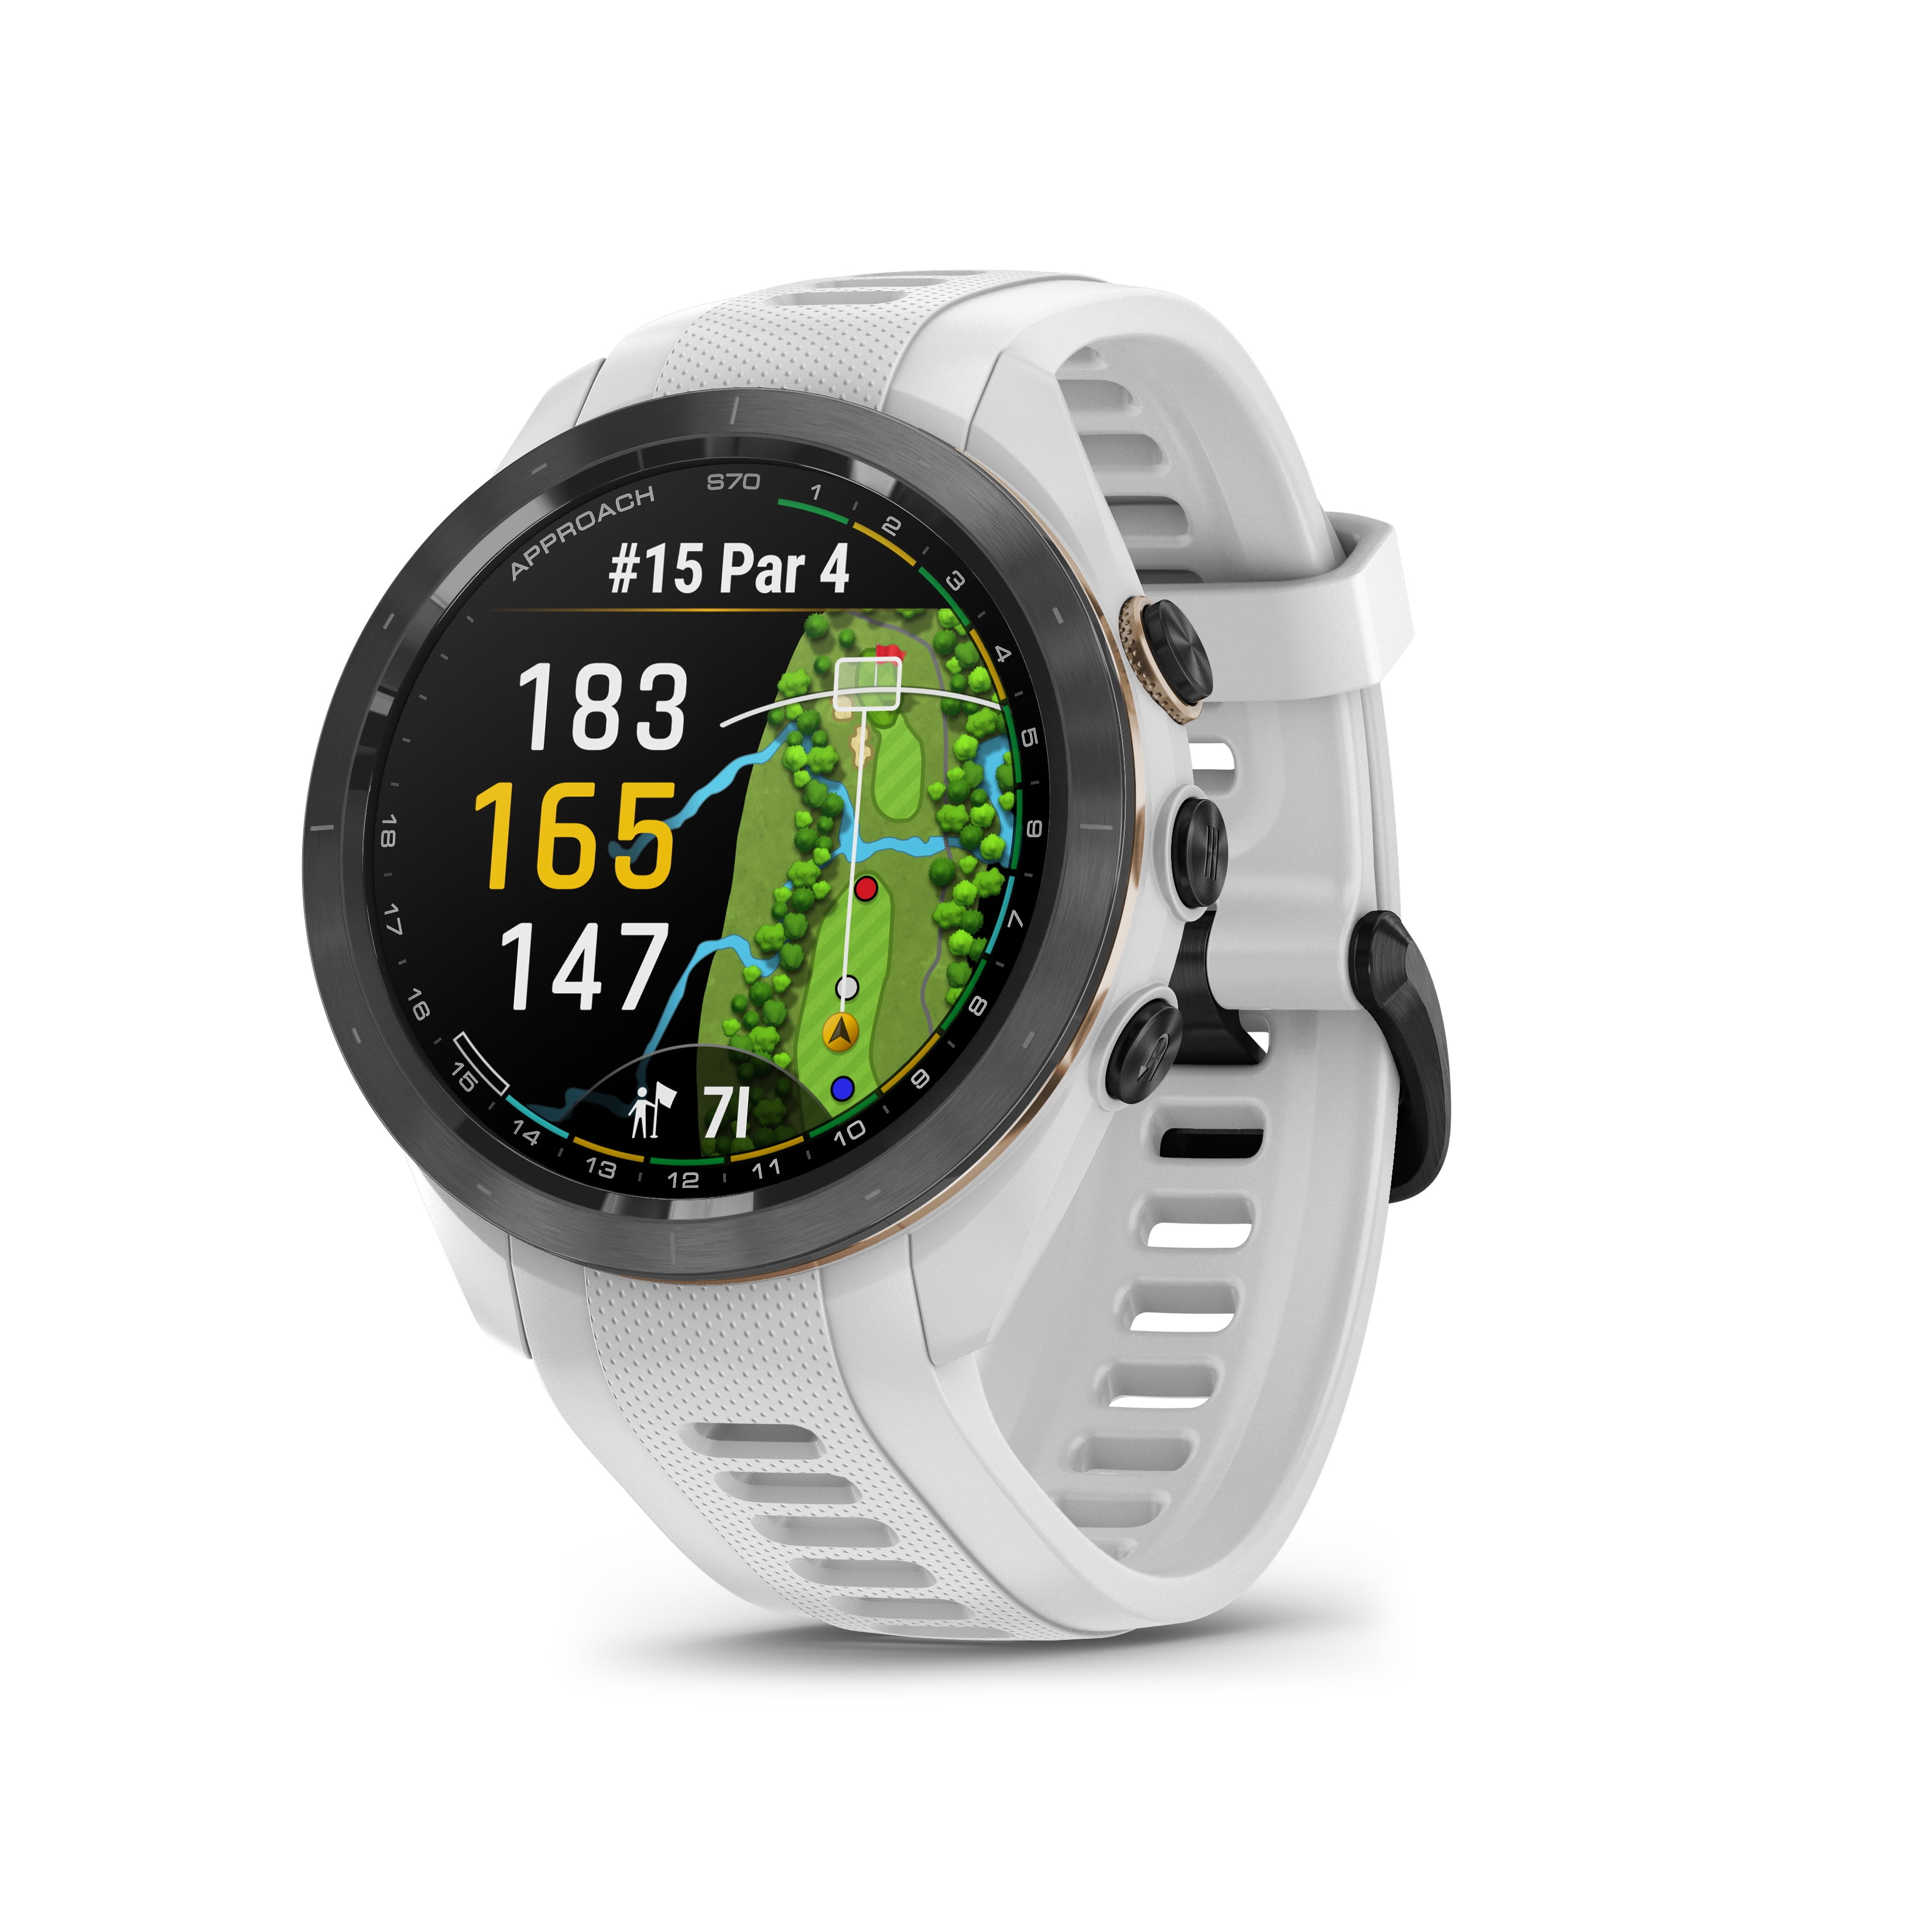 Garmin Approach S60 GPS golf watch with white silicone band : Amazon.in:  Sports, Fitness & Outdoors